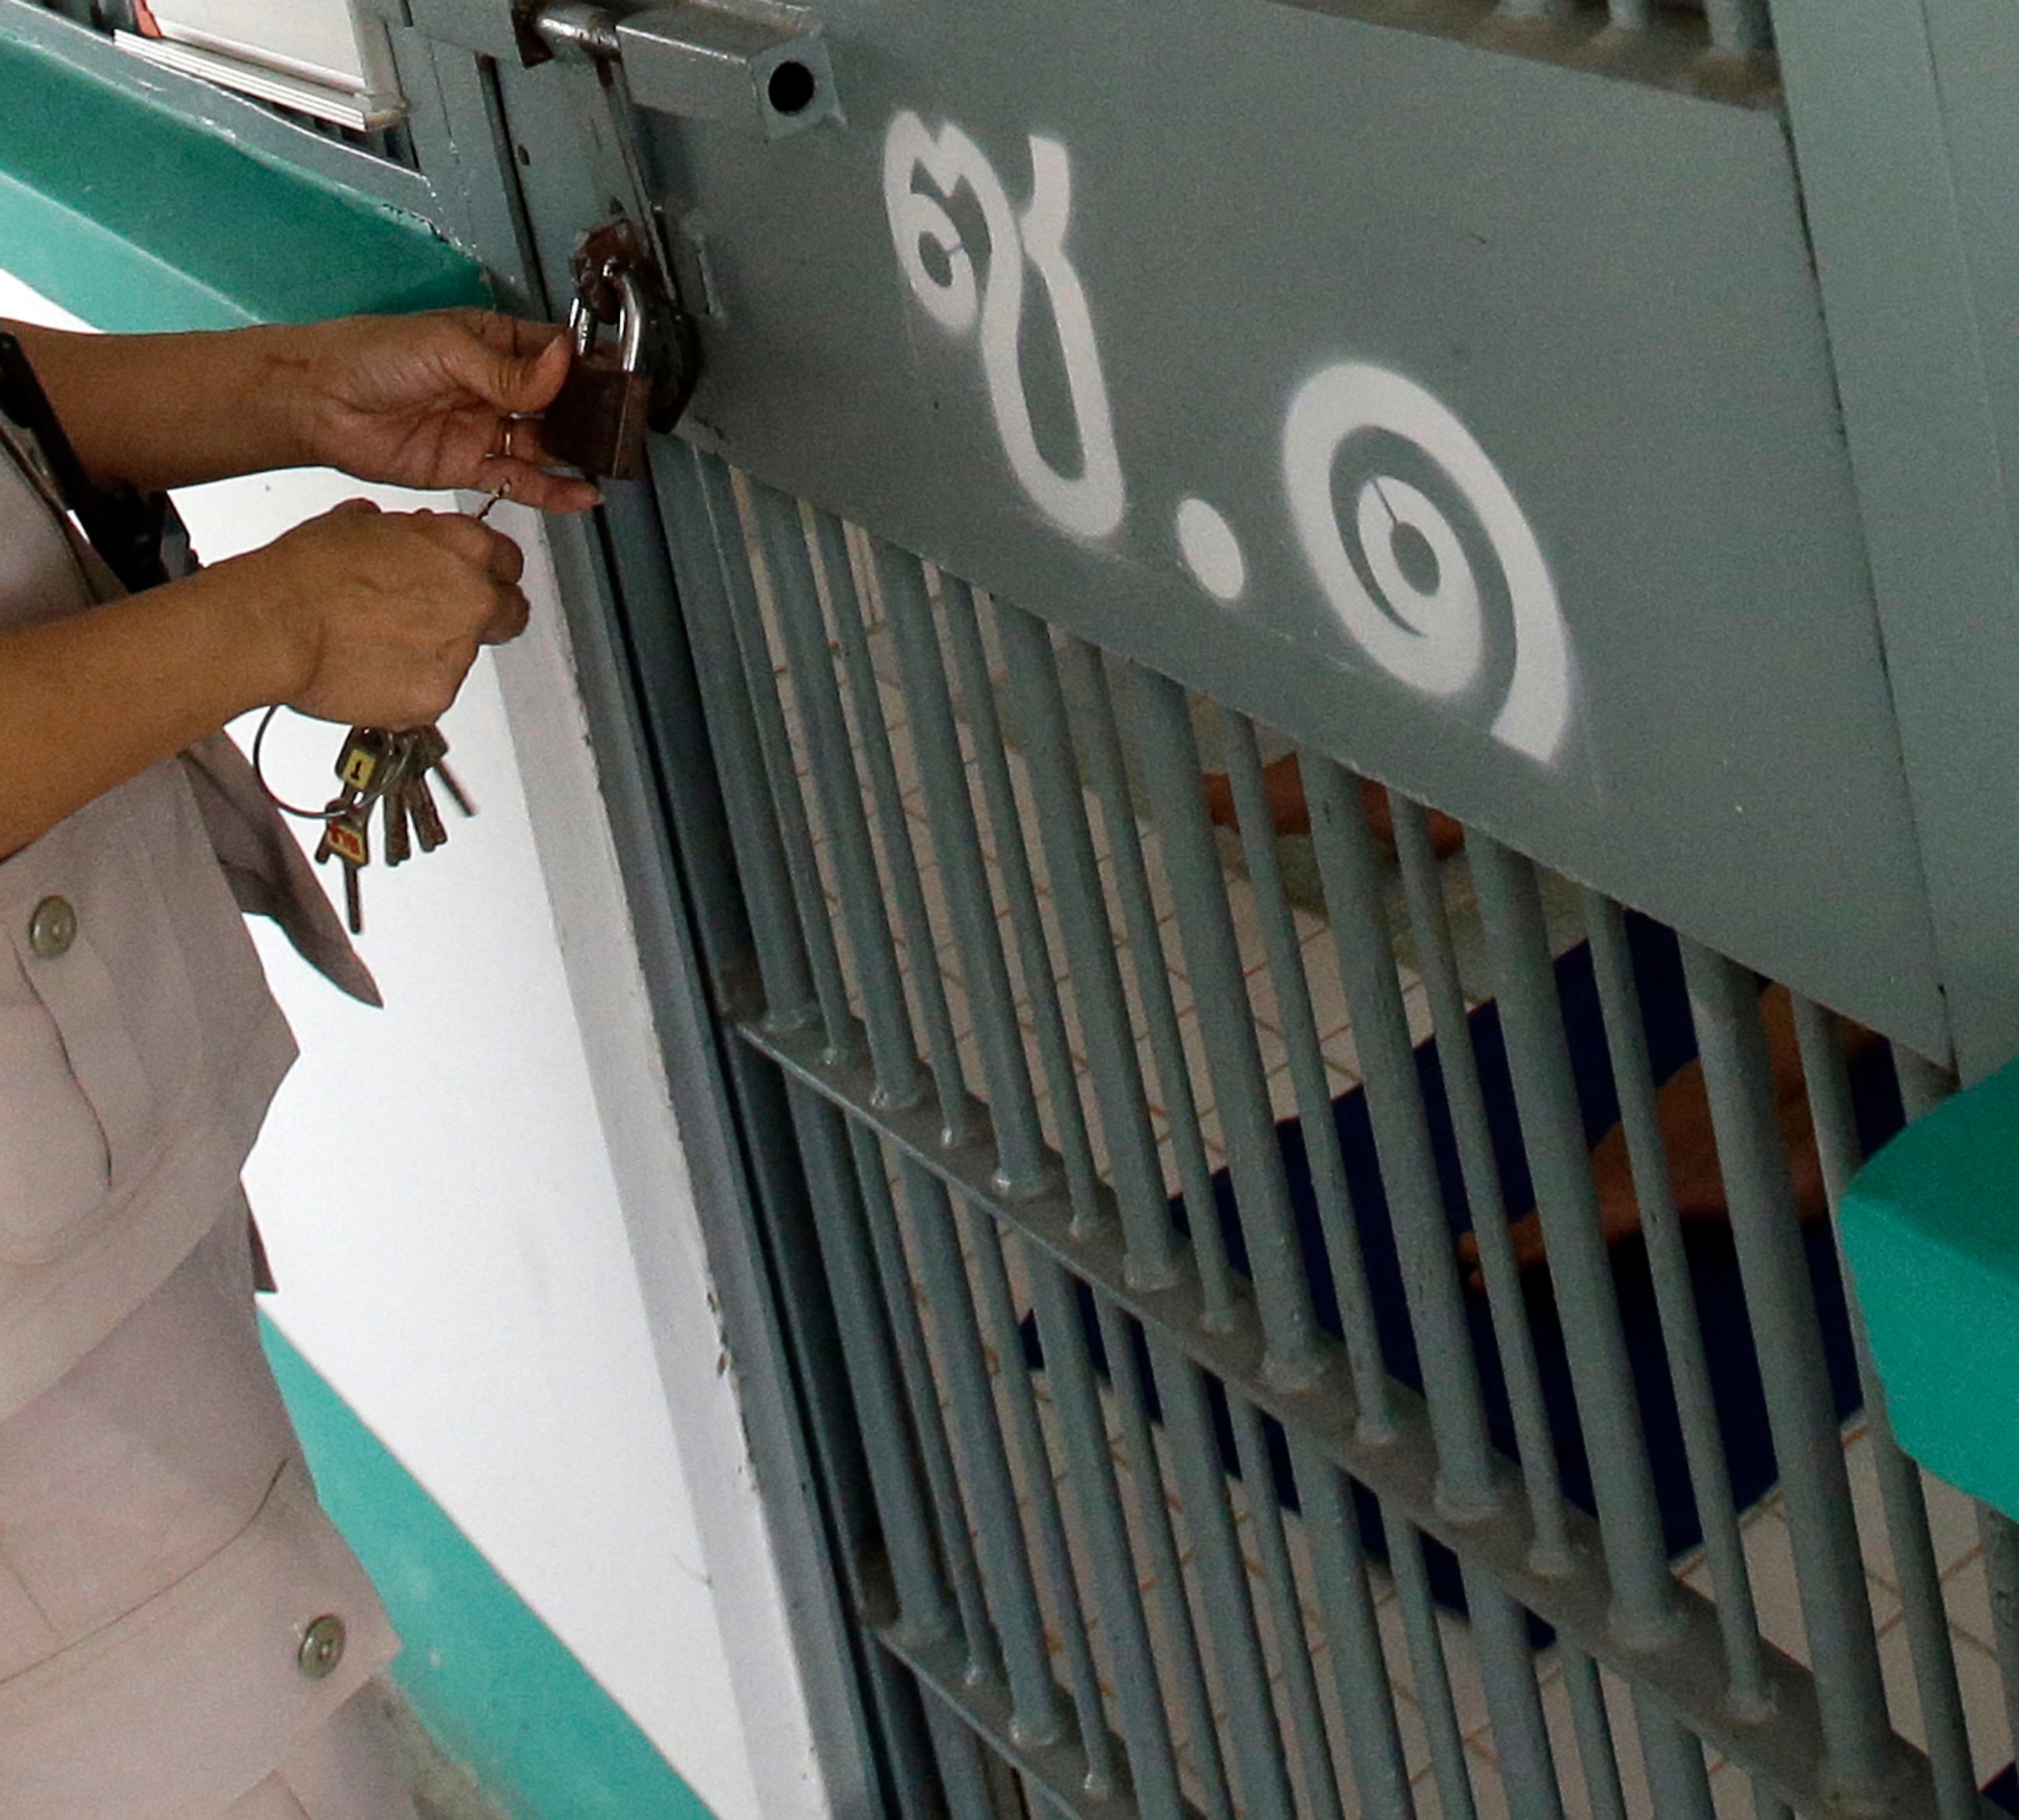 An officer locks a cell at a prison in Thailand, February 2017. © 2017 AP Photo/Sakchai Lalit